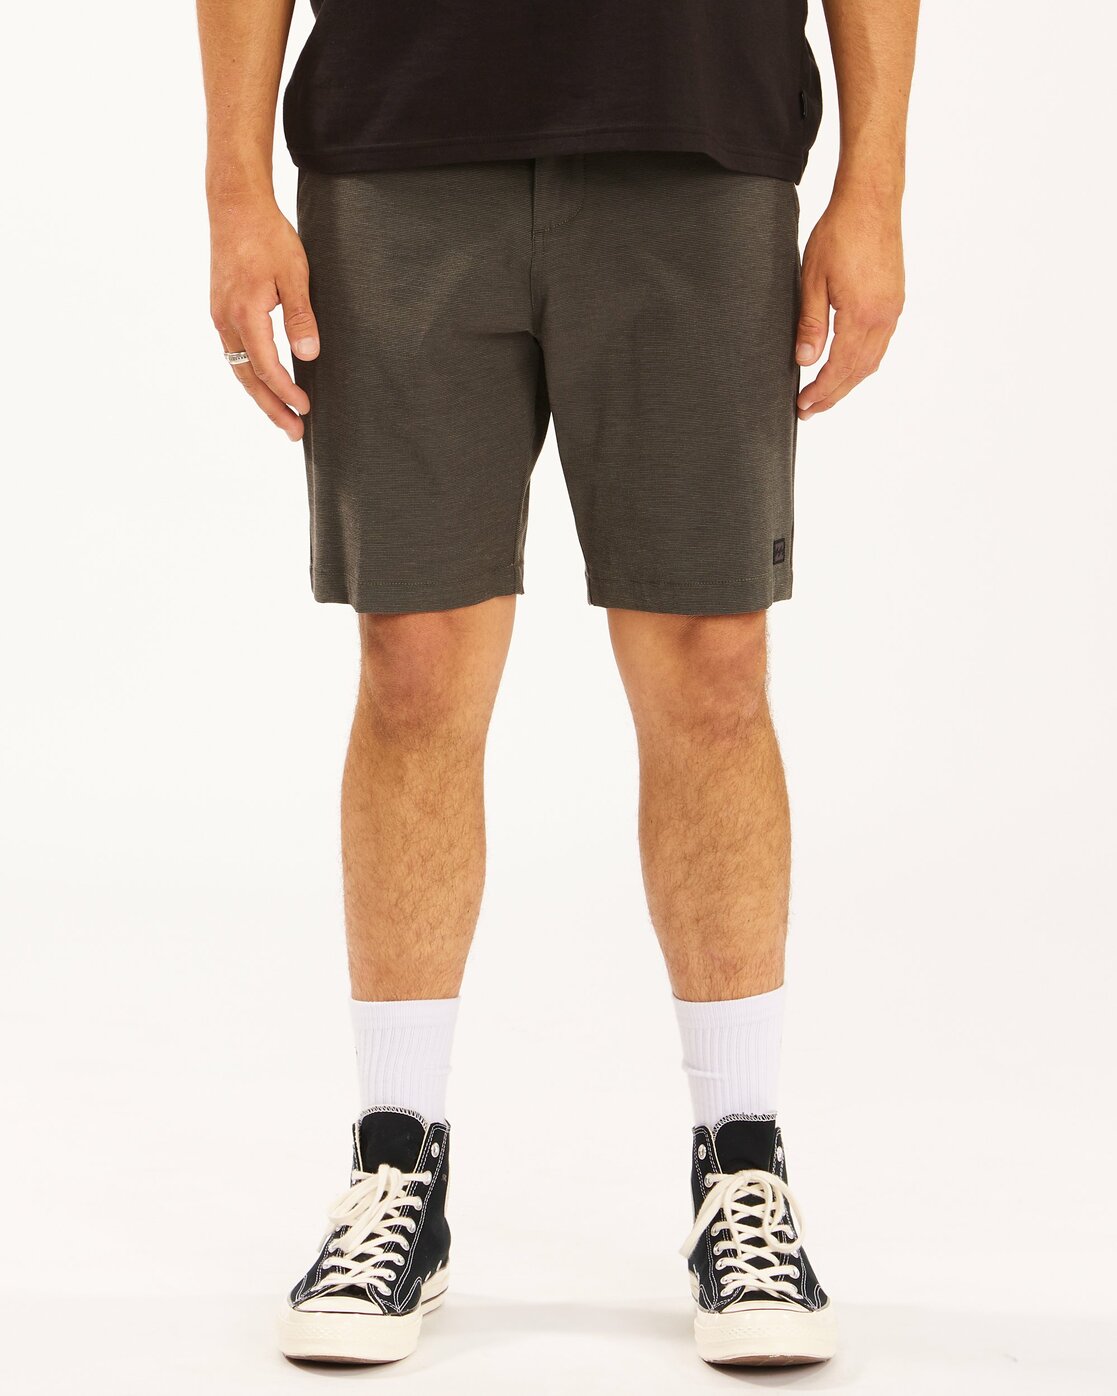 BUY ASFTWO Surf Board Shorts ON SALE NOW! - Cheap Surf Gear